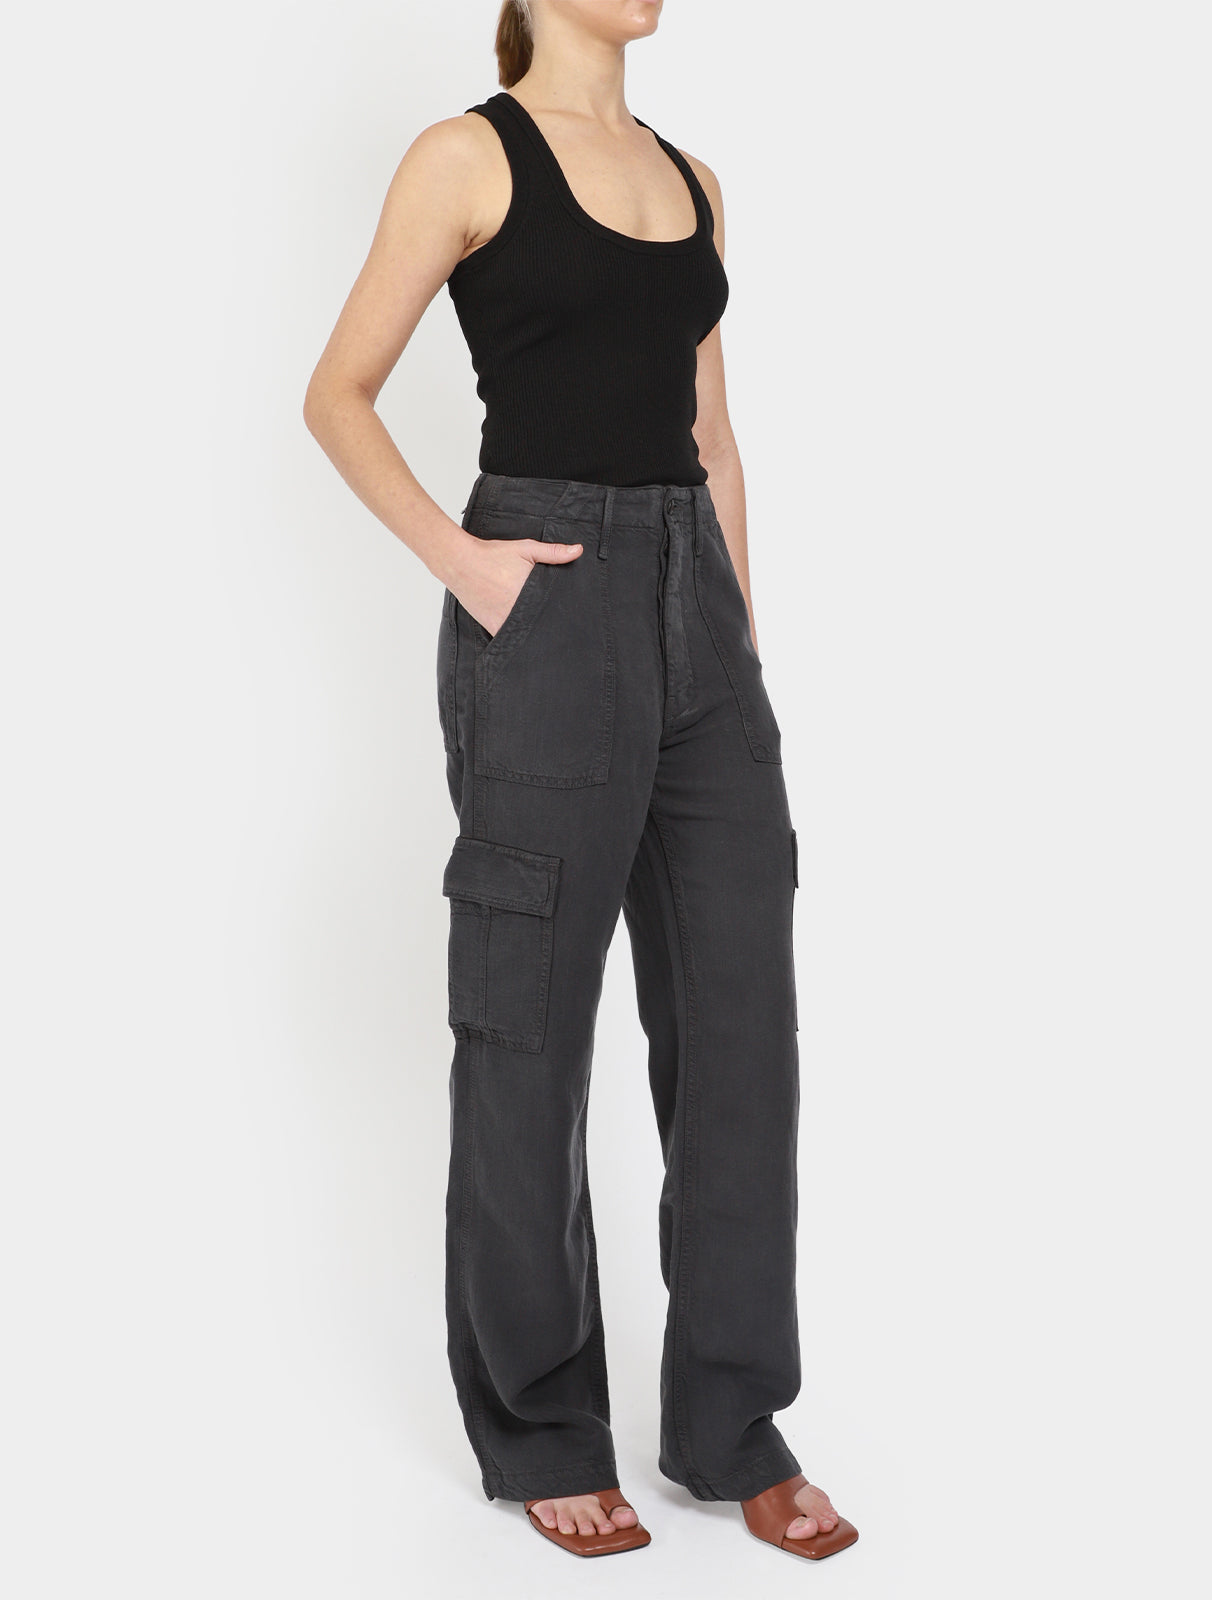 The Private Cargo Sneak Pants